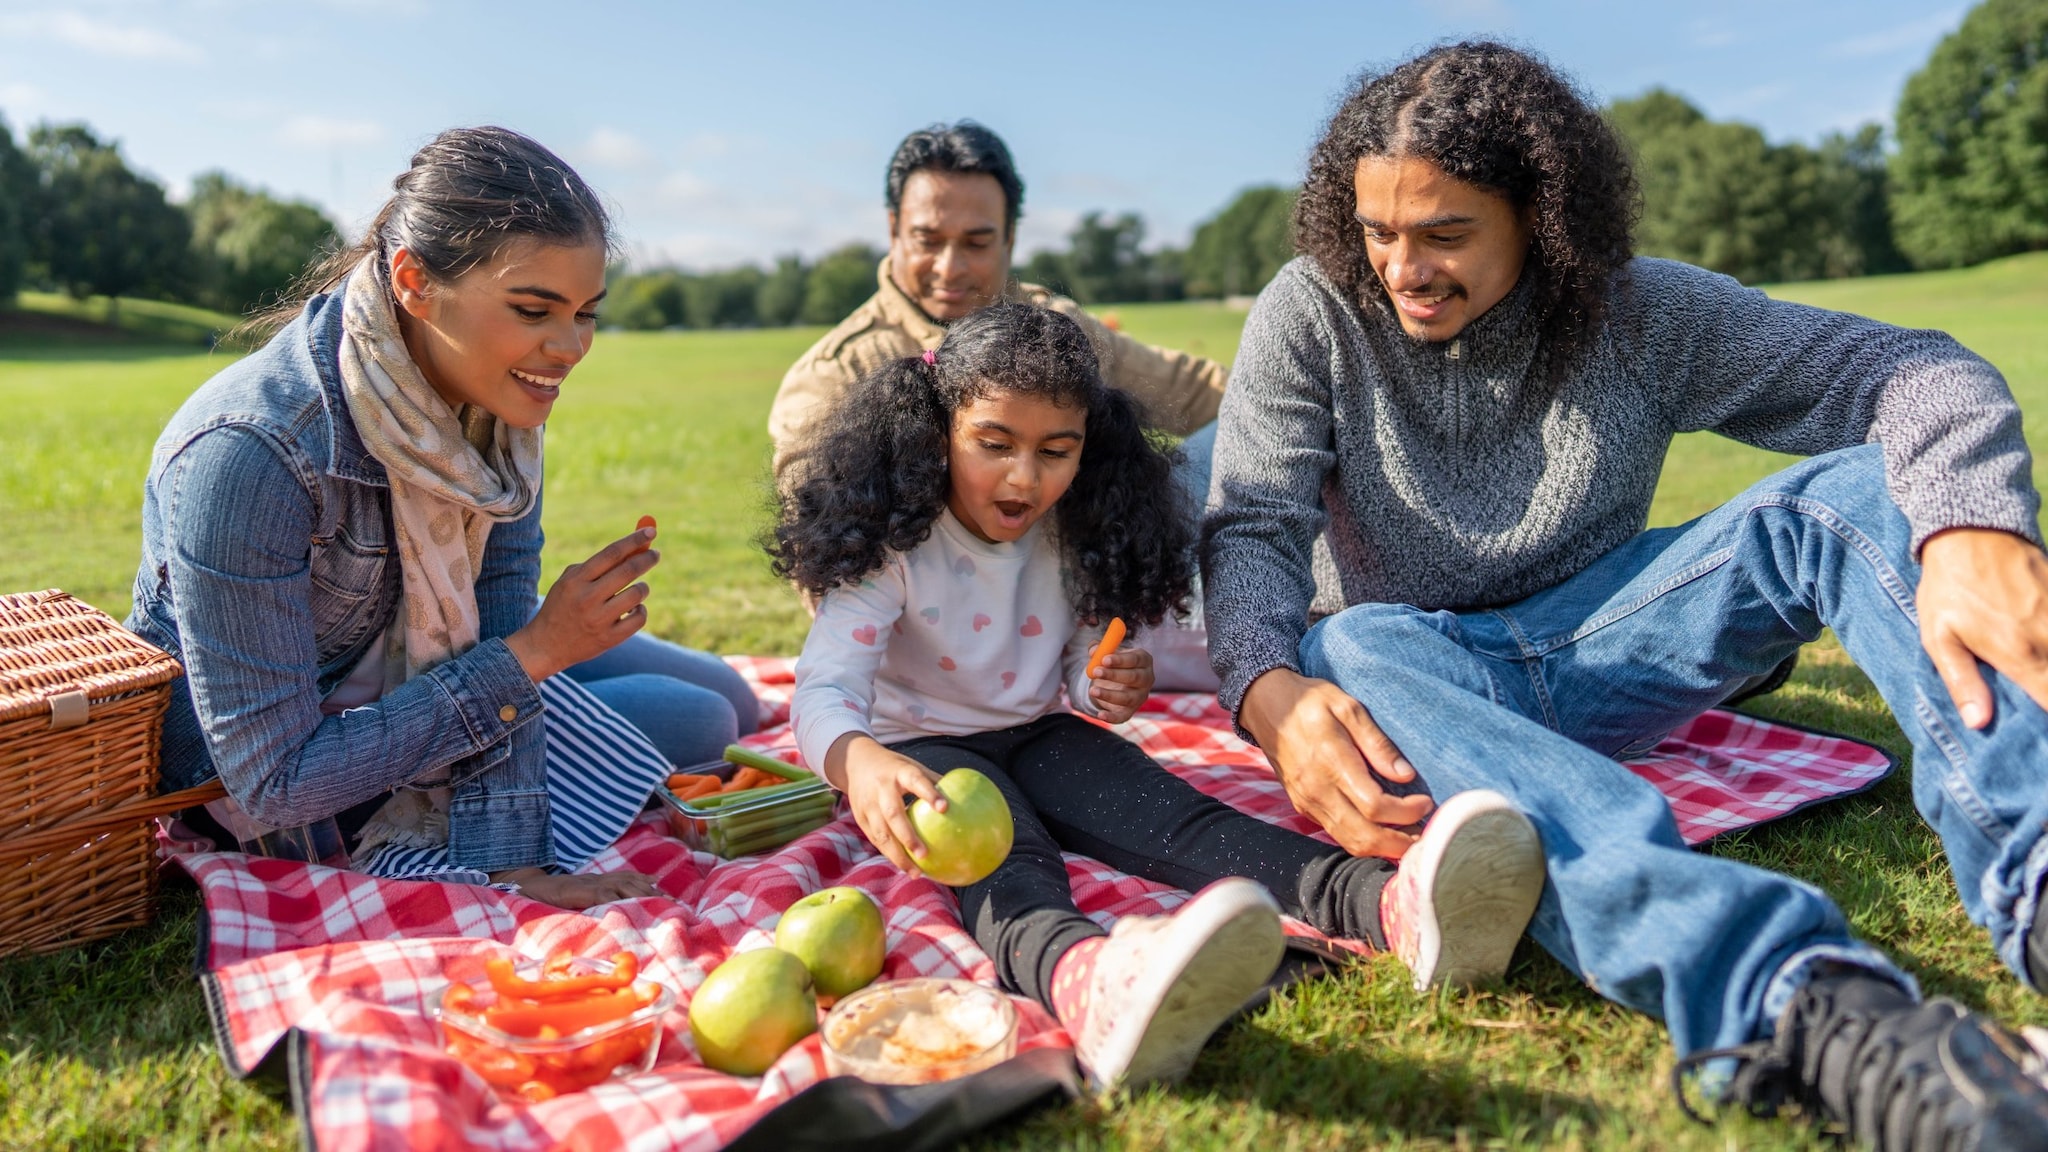 Four people having an outdoor picnic with healthy food.